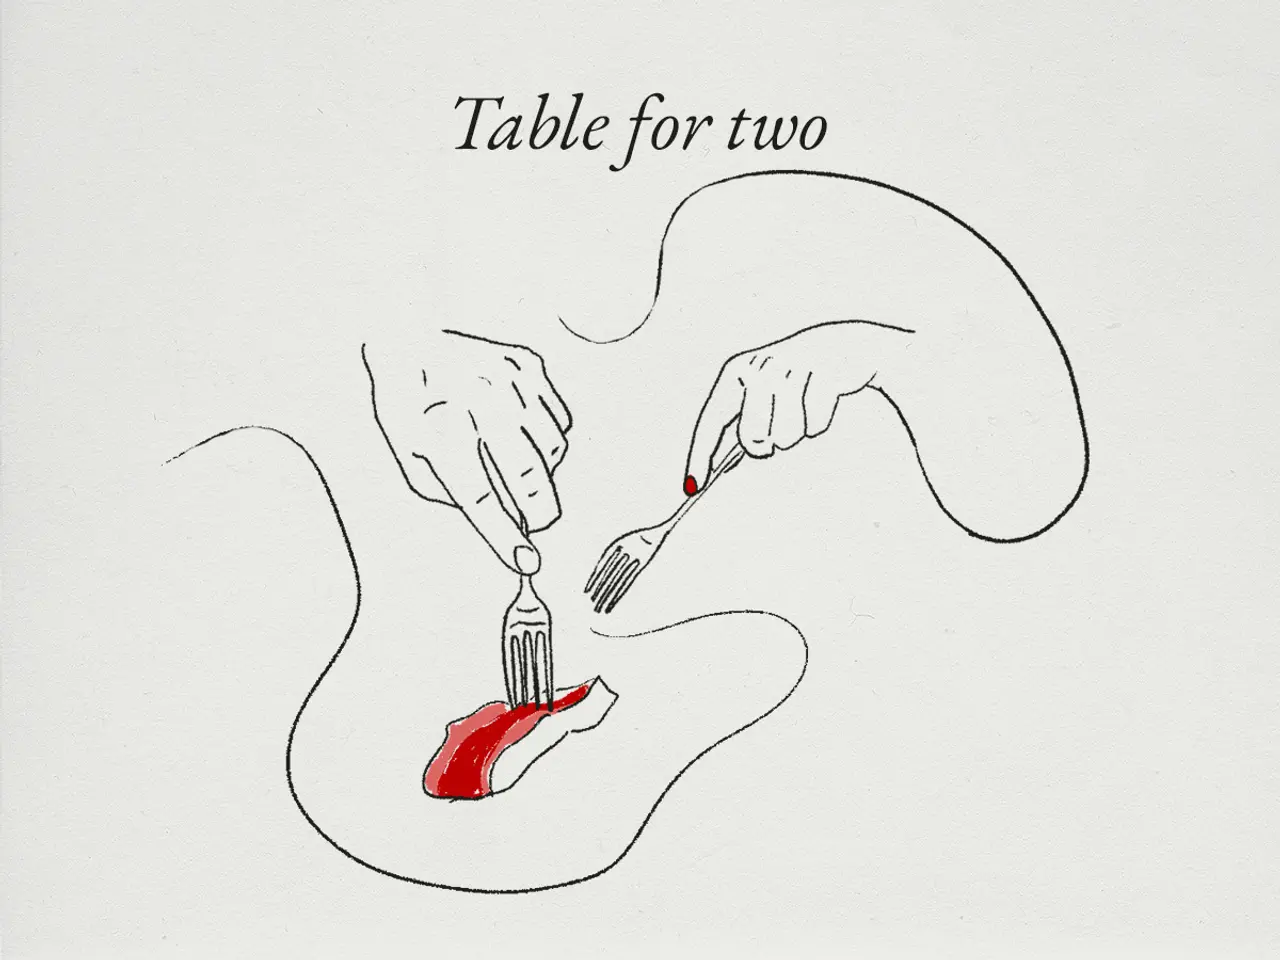 A minimalist drawing depicts two hands with utensils ready to eat from a single plate with a red high-heeled shoe on it, titled "Table for two."